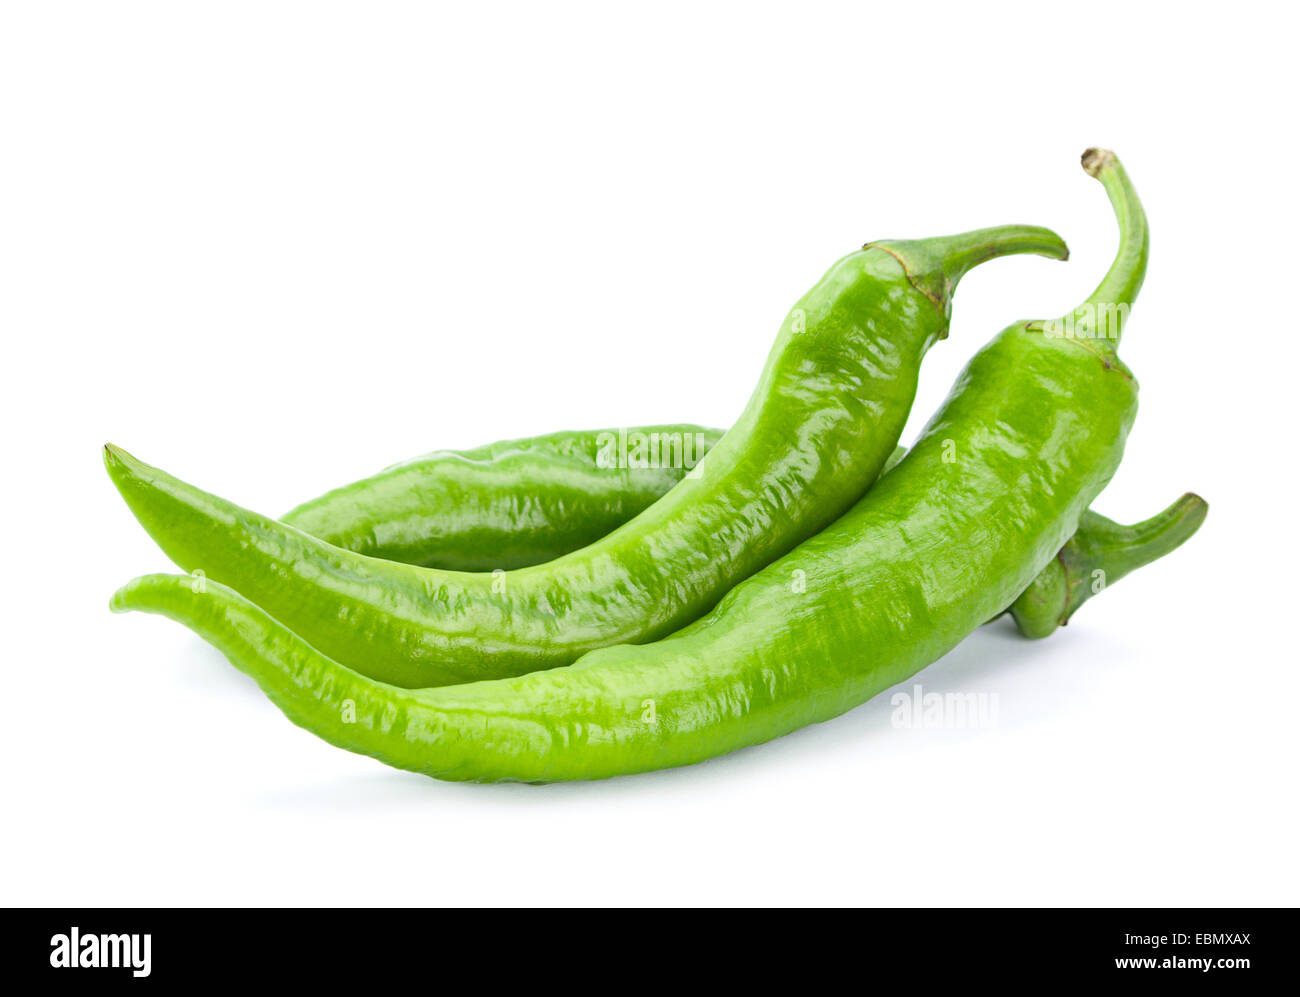 Piment vert libre isolated on white Banque D'Images